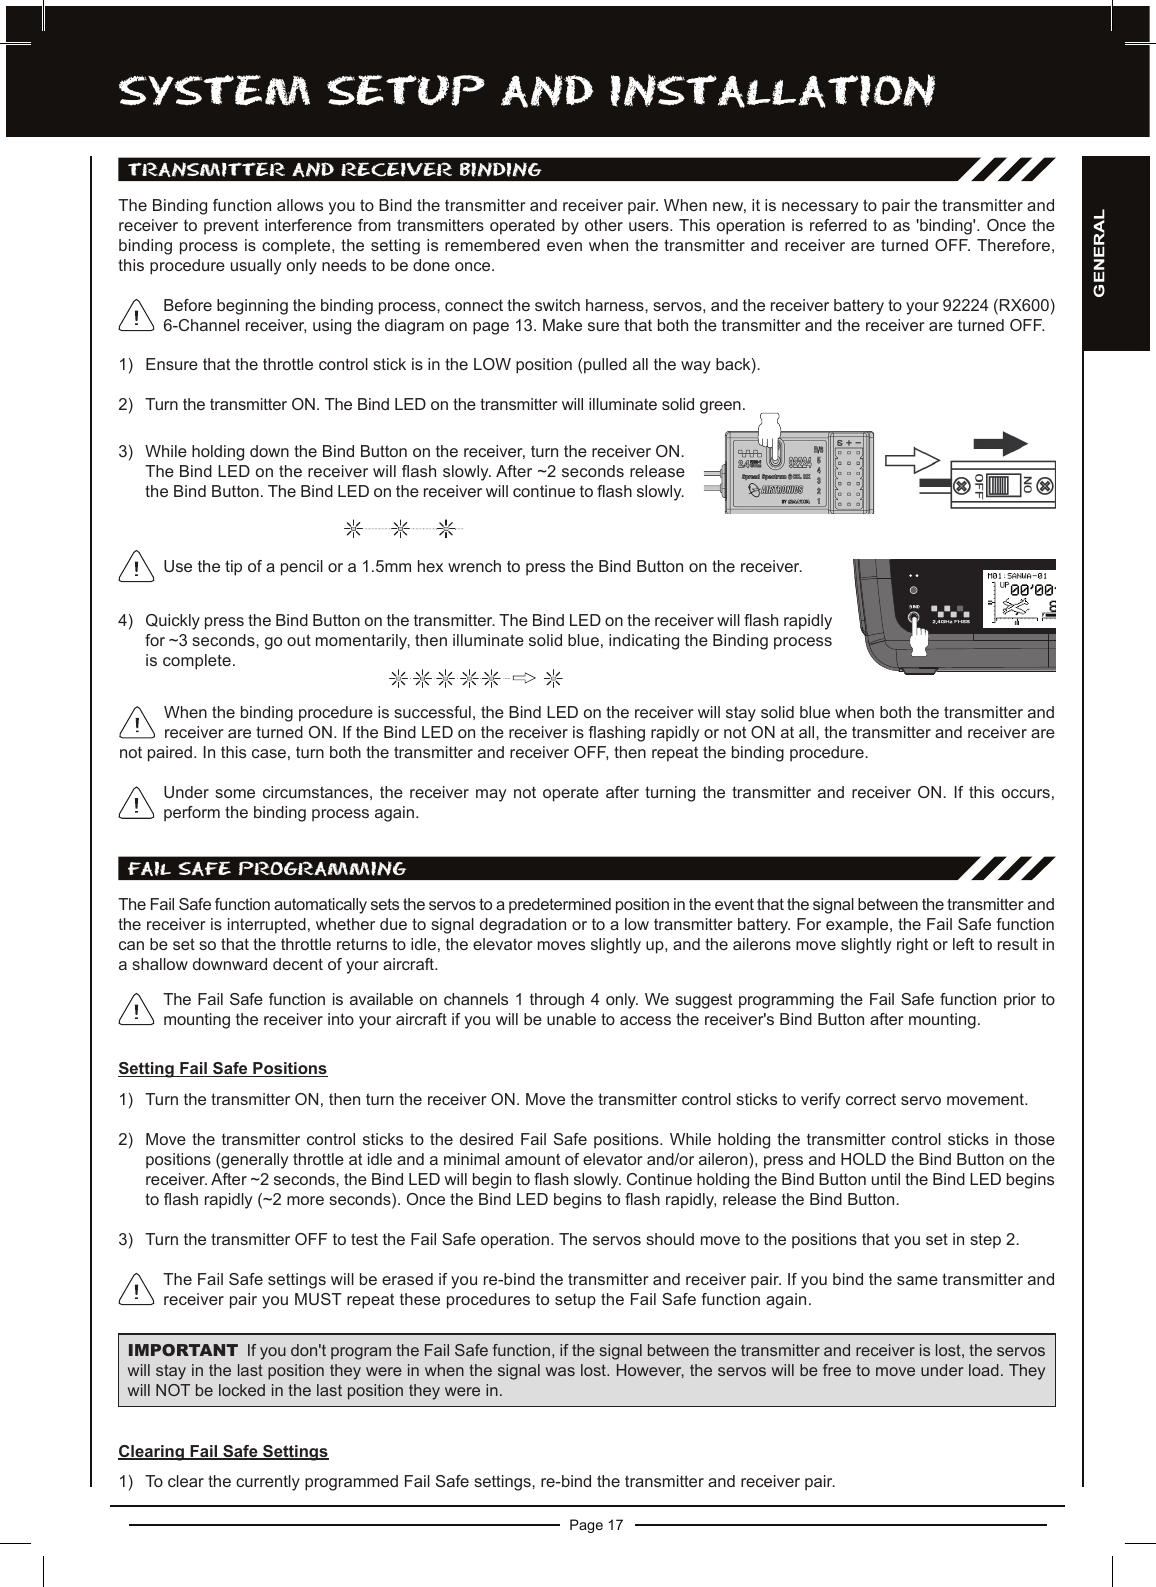 Page 17SySTEM SETUP anD inSTaLLaTiOnTRanSMiTTER anD REcEivER BinDingThe Binding function allows you to Bind the transmitter and receiver pair. When new, it is necessary to pair the transmitter and receiver to prevent interference from transmitters operated by other users. This operation is referred to as &apos;binding&apos;. Once the binding process is complete, the setting is remembered even when the transmitter and receiver are turned OFF. Therefore, this procedure usually only needs to be done once.Under some circumstances, the receiver may not operate after turning the transmitter and receiver ON. If this occurs, perform the binding process again.Before beginning the binding process, connect the switch harness, servos, and the receiver battery to your 92224 (RX600) 6-Channel receiver, using the diagram on page 13. Make sure that both the transmitter and the receiver are turned OFF.When the binding procedure is successful, the Bind LED on the receiver will stay solid blue when both the transmitter and receiver are turned ON. If the Bind LED on the receiver is ashing rapidly or not ON at all, the transmitter and receiver are not paired. In this case, turn both the transmitter and receiver OFF, then repeat the binding procedure.1) Ensure that the throttle control stick is in the LOW position (pulled all the way back).2) Turn the transmitter ON. The Bind LED on the transmitter will illuminate solid green.Use the tip of a pencil or a 1.5mm hex wrench to press the Bind Button on the receiver.3) While holding down the Bind Button on the receiver, turn the receiver ON. The Bind LED on the receiver will ash slowly. After ~2 seconds release the Bind Button. The Bind LED on the receiver will continue to ash slowly.4) Quickly press the Bind Button on the transmitter. The Bind LED on the receiver will ash rapidly for ~3 seconds, go out momentarily, then illuminate solid blue, indicating the Binding process is complete.FaiL SaFE PROgRaMMingThe Fail Safe function automatically sets the servos to a predetermined position in the event that the signal between the transmitter and the receiver is interrupted, whether due to signal degradation or to a low transmitter battery. For example, the Fail Safe function can be set so that the throttle returns to idle, the elevator moves slightly up, and the ailerons move slightly right or left to result in a shallow downward decent of your aircraft.The Fail Safe function is available on channels 1 through 4 only. We suggest programming the Fail Safe function prior to mounting the receiver into your aircraft if you will be unable to access the receiver&apos;s Bind Button after mounting.Setting Fail Safe Positions1) Turn the transmitter ON, then turn the receiver ON. Move the transmitter control sticks to verify correct servo movement.2) Move the transmitter control sticks to the desired Fail Safe positions. While holding the transmitter control sticks in those positions (generally throttle at idle and a minimal amount of elevator and/or aileron), press and HOLD the Bind Button on the receiver. After ~2 seconds, the Bind LED will begin to ash slowly. Continue holding the Bind Button until the Bind LED begins to ash rapidly (~2 more seconds). Once the Bind LED begins to ash rapidly, release the Bind Button.3) Turn the transmitter OFF to test the Fail Safe operation. The servos should move to the positions that you set in step 2.The Fail Safe settings will be erased if you re-bind the transmitter and receiver pair. If you bind the same transmitter and receiver pair you MUST repeat these procedures to setup the Fail Safe function again.IMPORTANT If you don&apos;t program the Fail Safe function, if the signal between the transmitter and receiver is lost, the servos will stay in the last position they were in when the signal was lost. However, the servos will be free to move under load. They will NOT be locked in the last position they were in.Clearing Fail Safe Settings1) To clear the currently programmed Fail Safe settings, re-bind the transmitter and receiver pair.GENERAL